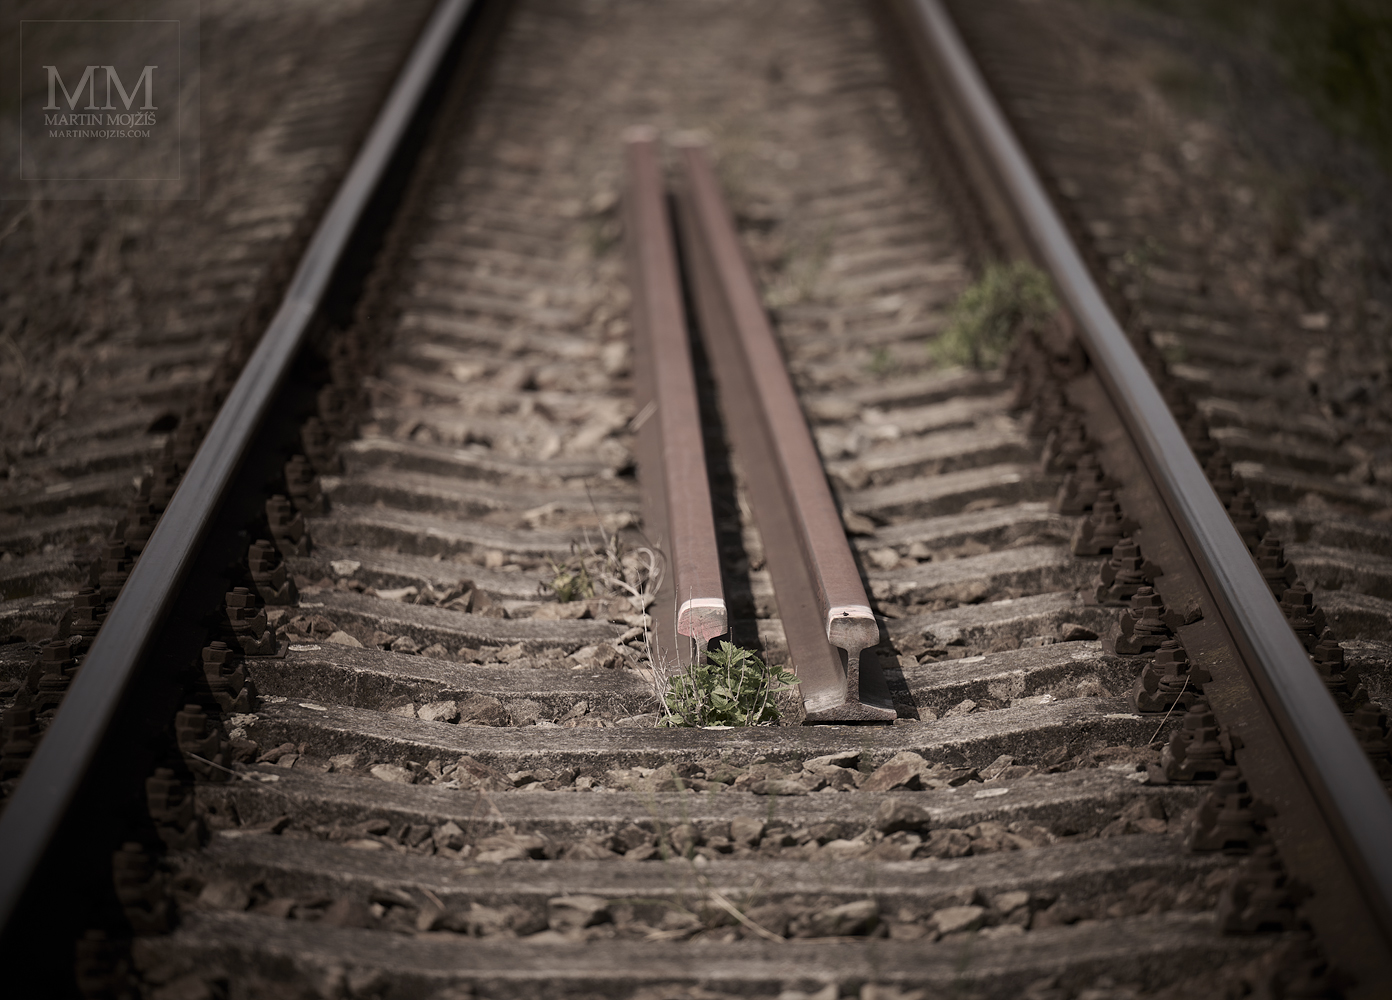 The railway rails in a railway track. Fine art photograph BEFORE A REPAIR, photographed by Martin Mojzis.